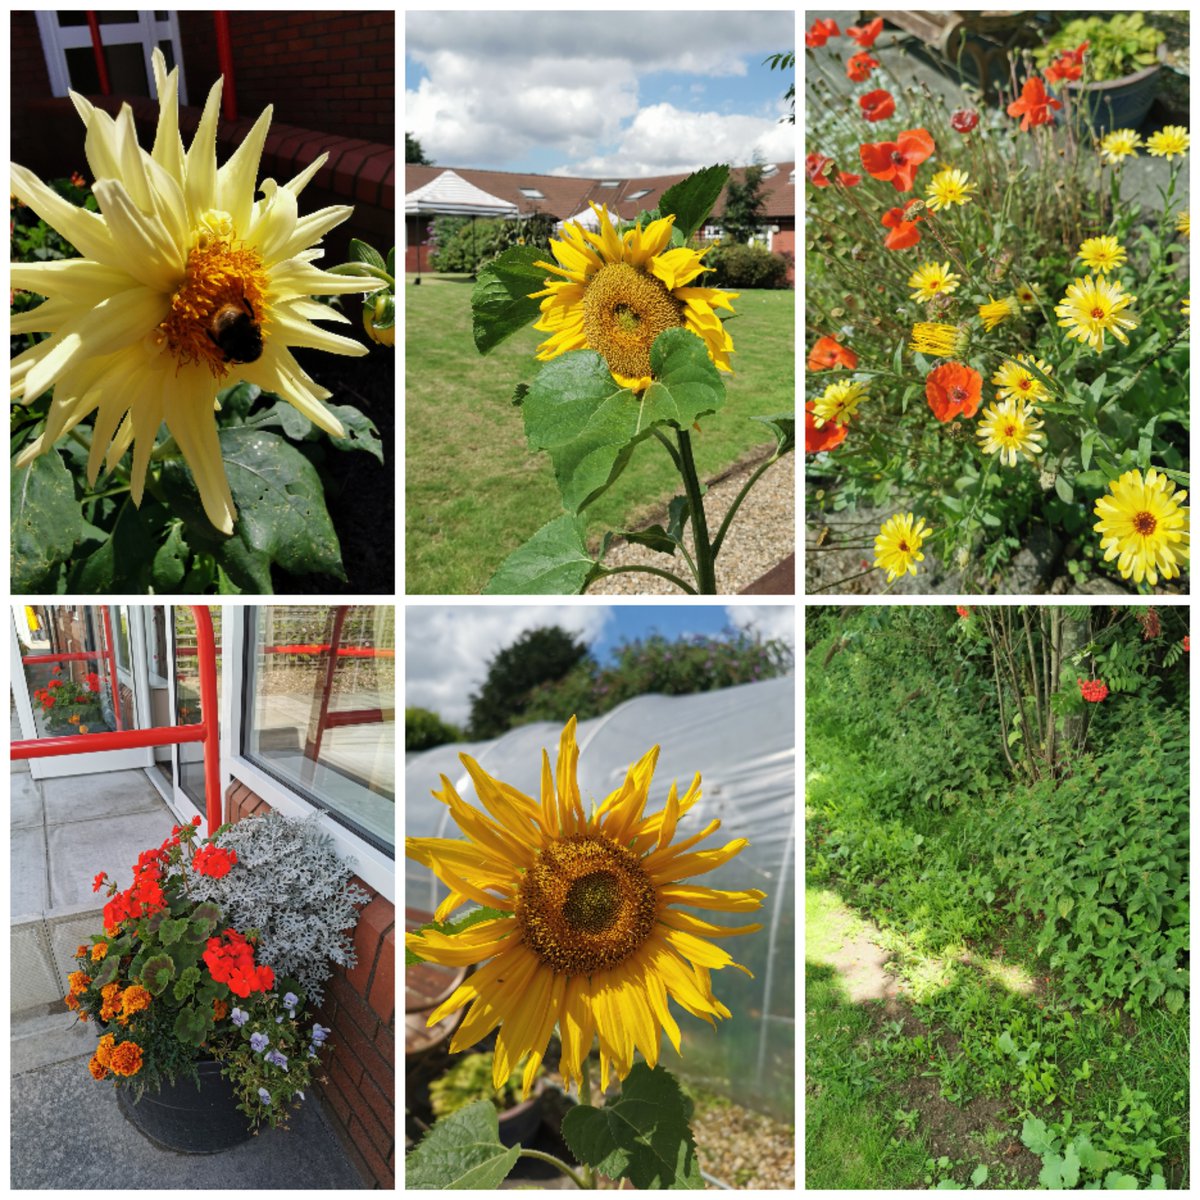 Beautiful day to spend time in the gardens @AvondaleMHC Bees are buzzing and so are we, with all the great growing going on. Gardening is good for you, be that taking part or just enjoying it🌻. Move over #GardenersWorld @TheMontyDon @TitchmarshShow 😁😍💚🐝#MentalHealthMatters